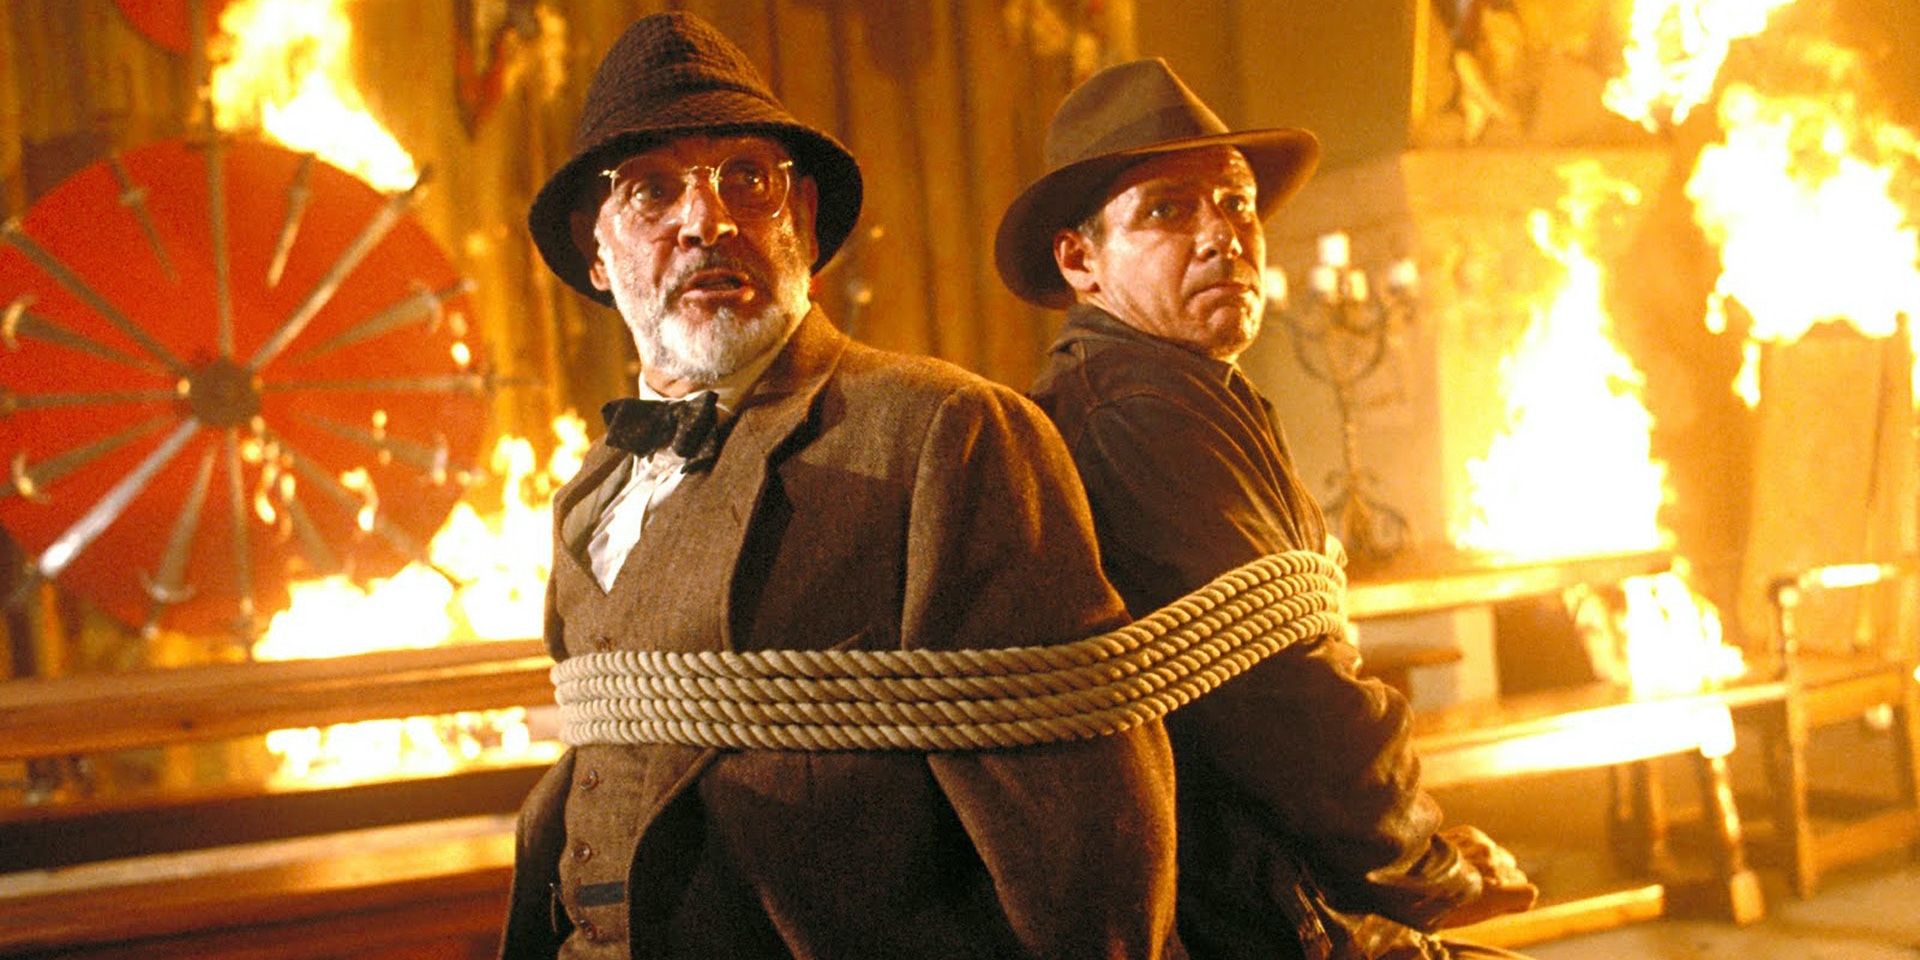 Spielberg Cast Connery In Indiana Jones & The Last Crusade Thanks To James Bond